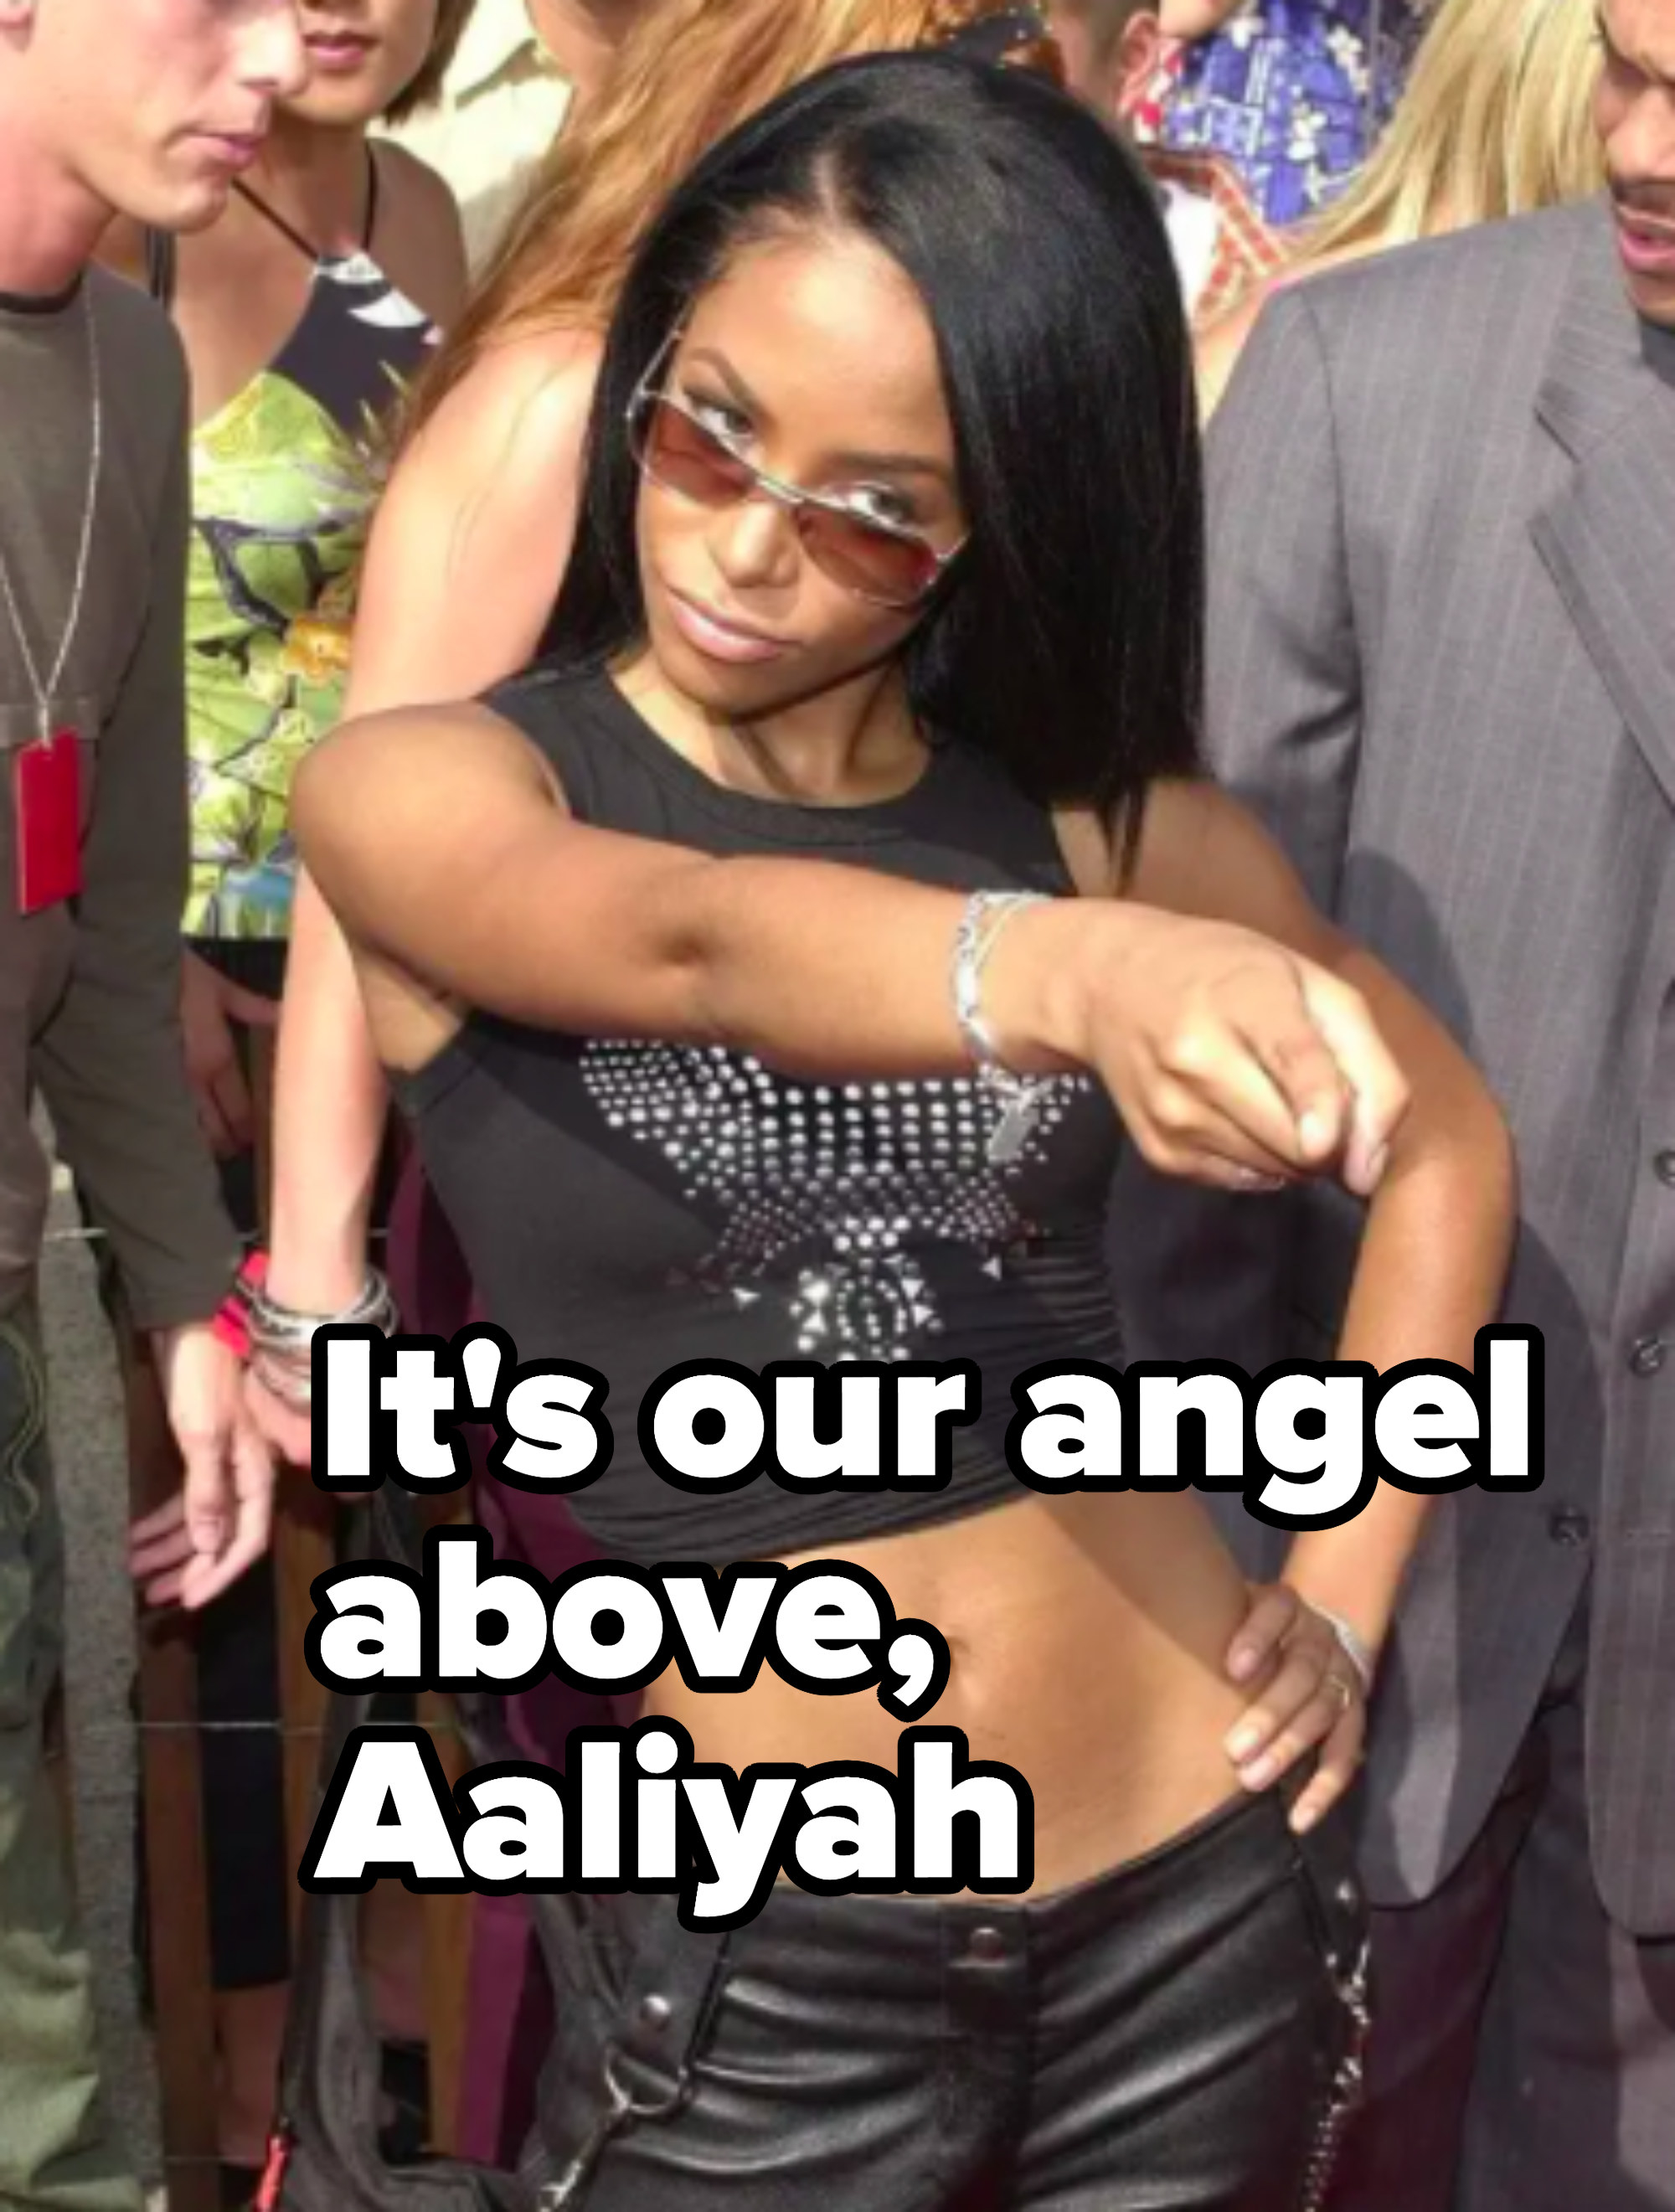 aaliyah is pointing on a red carpet